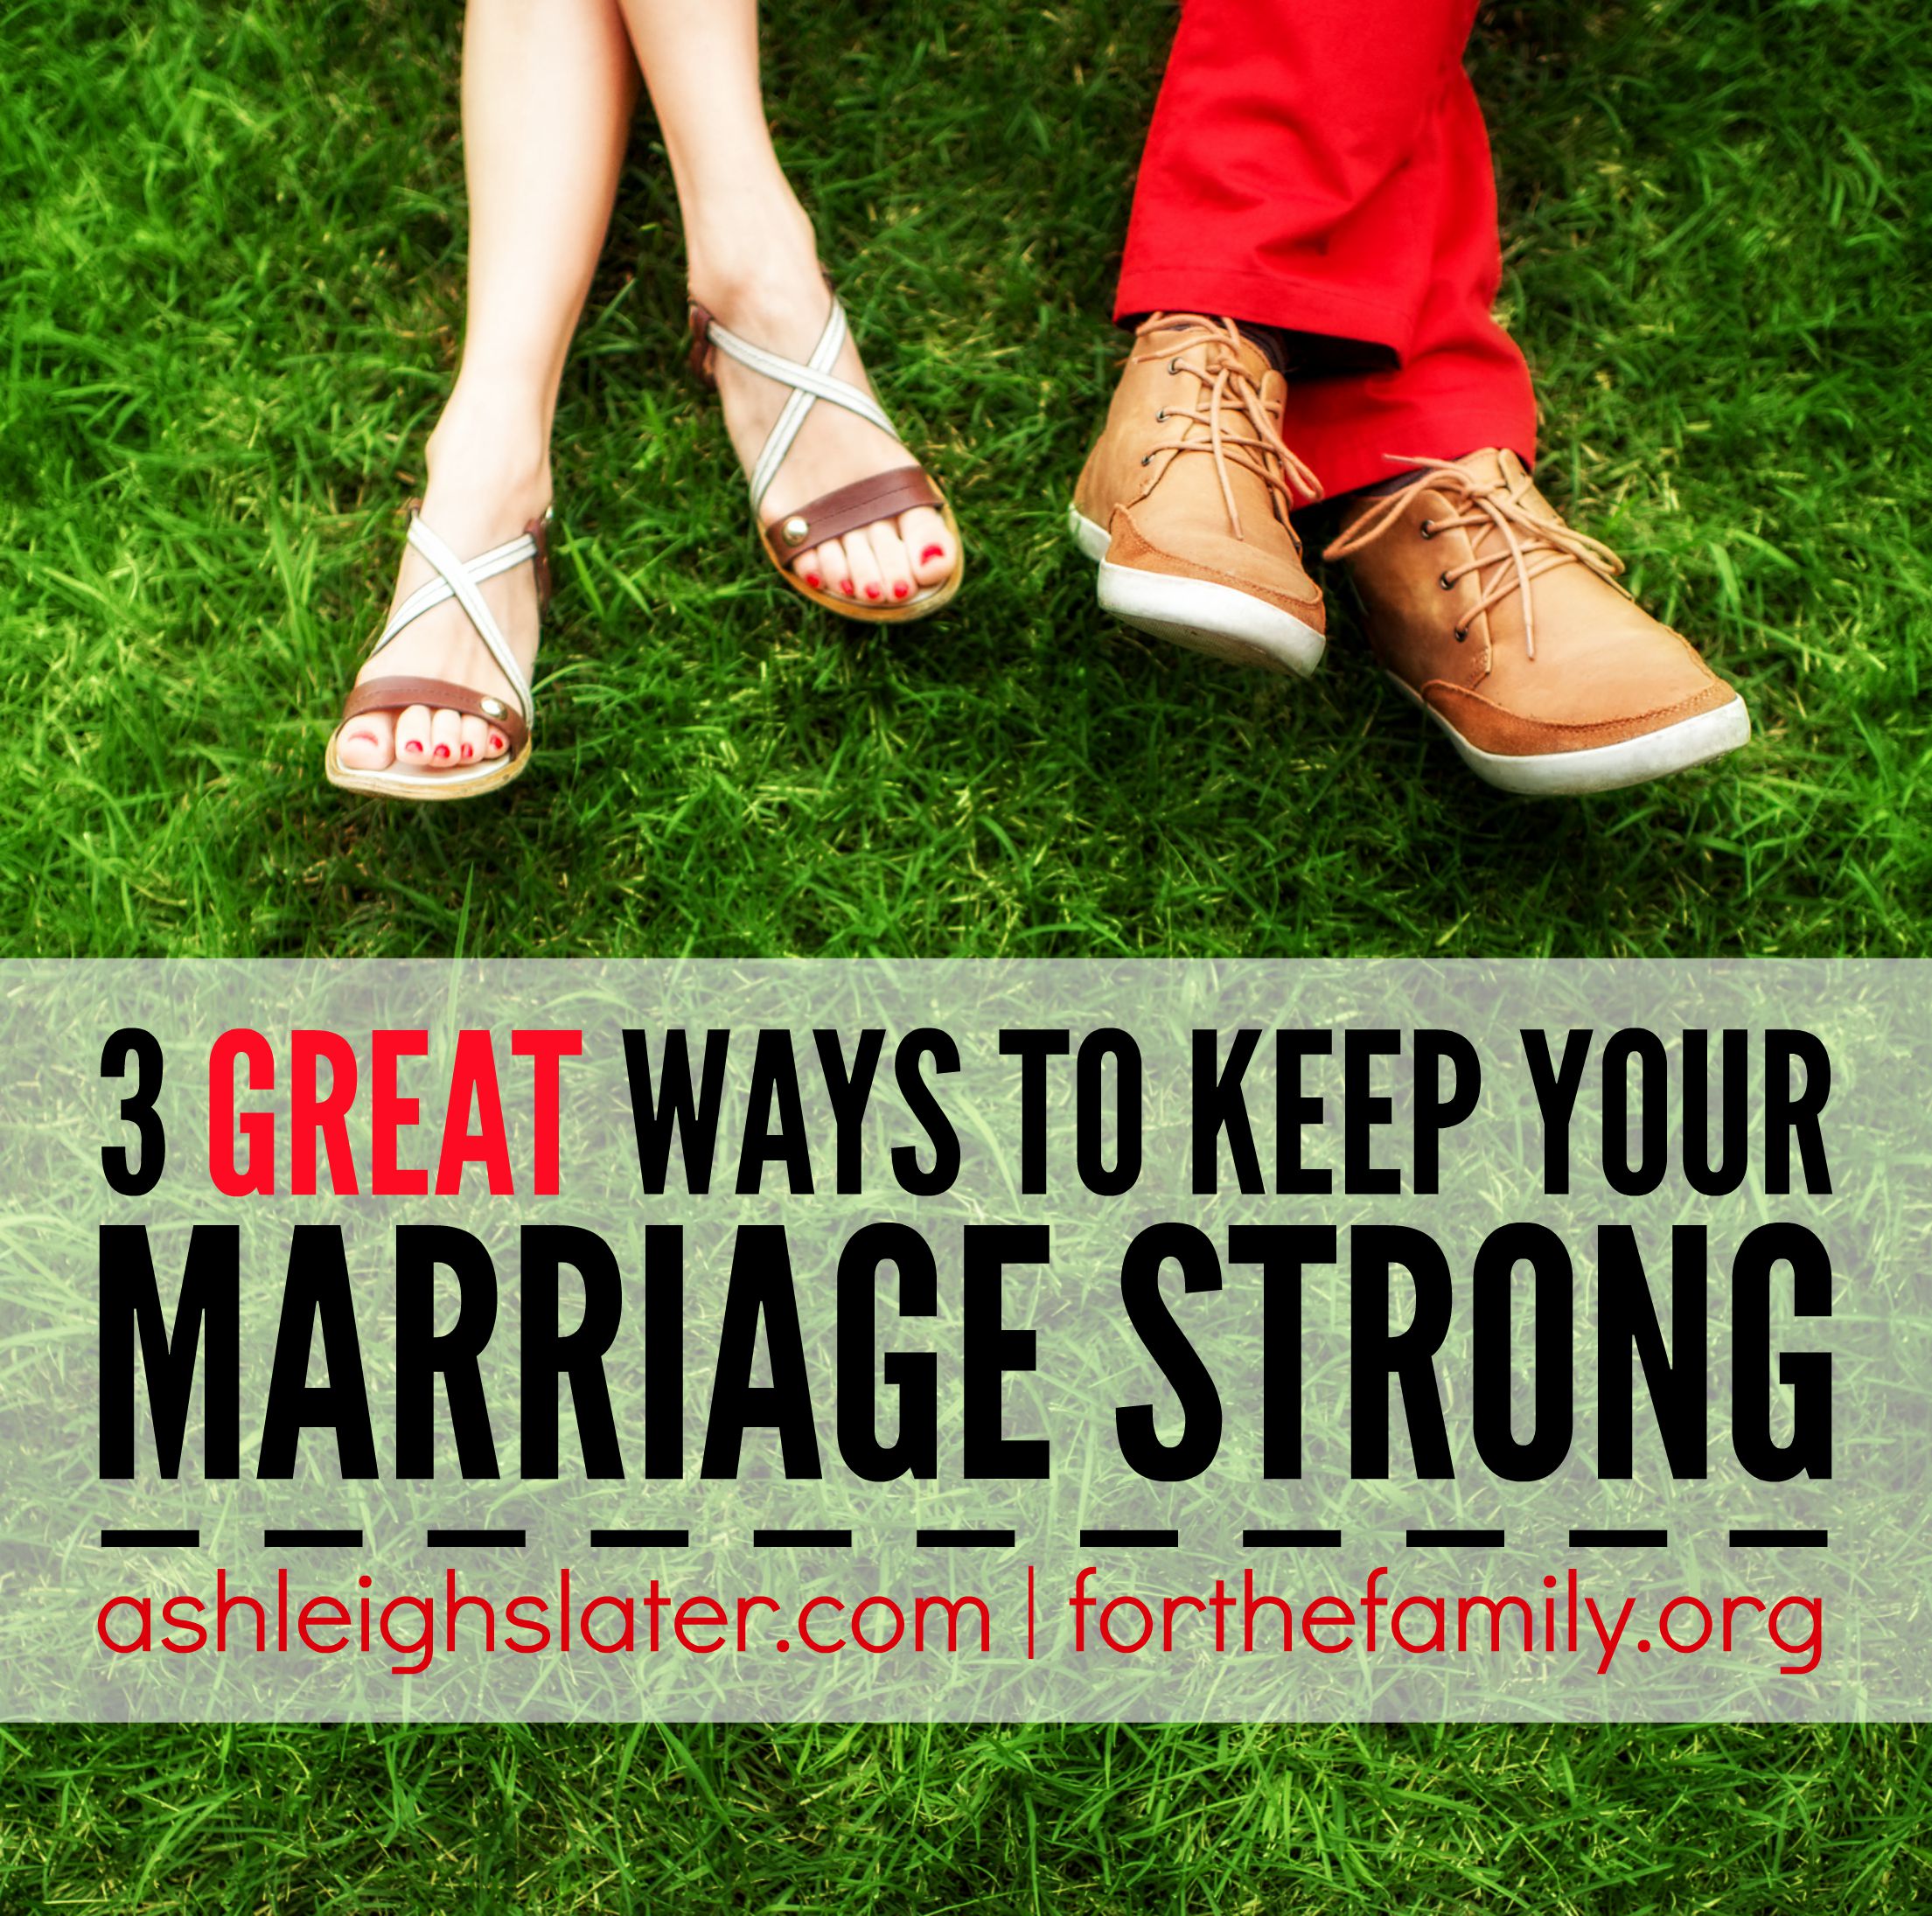 3 Great Ways to Keep Your Marriage Strong